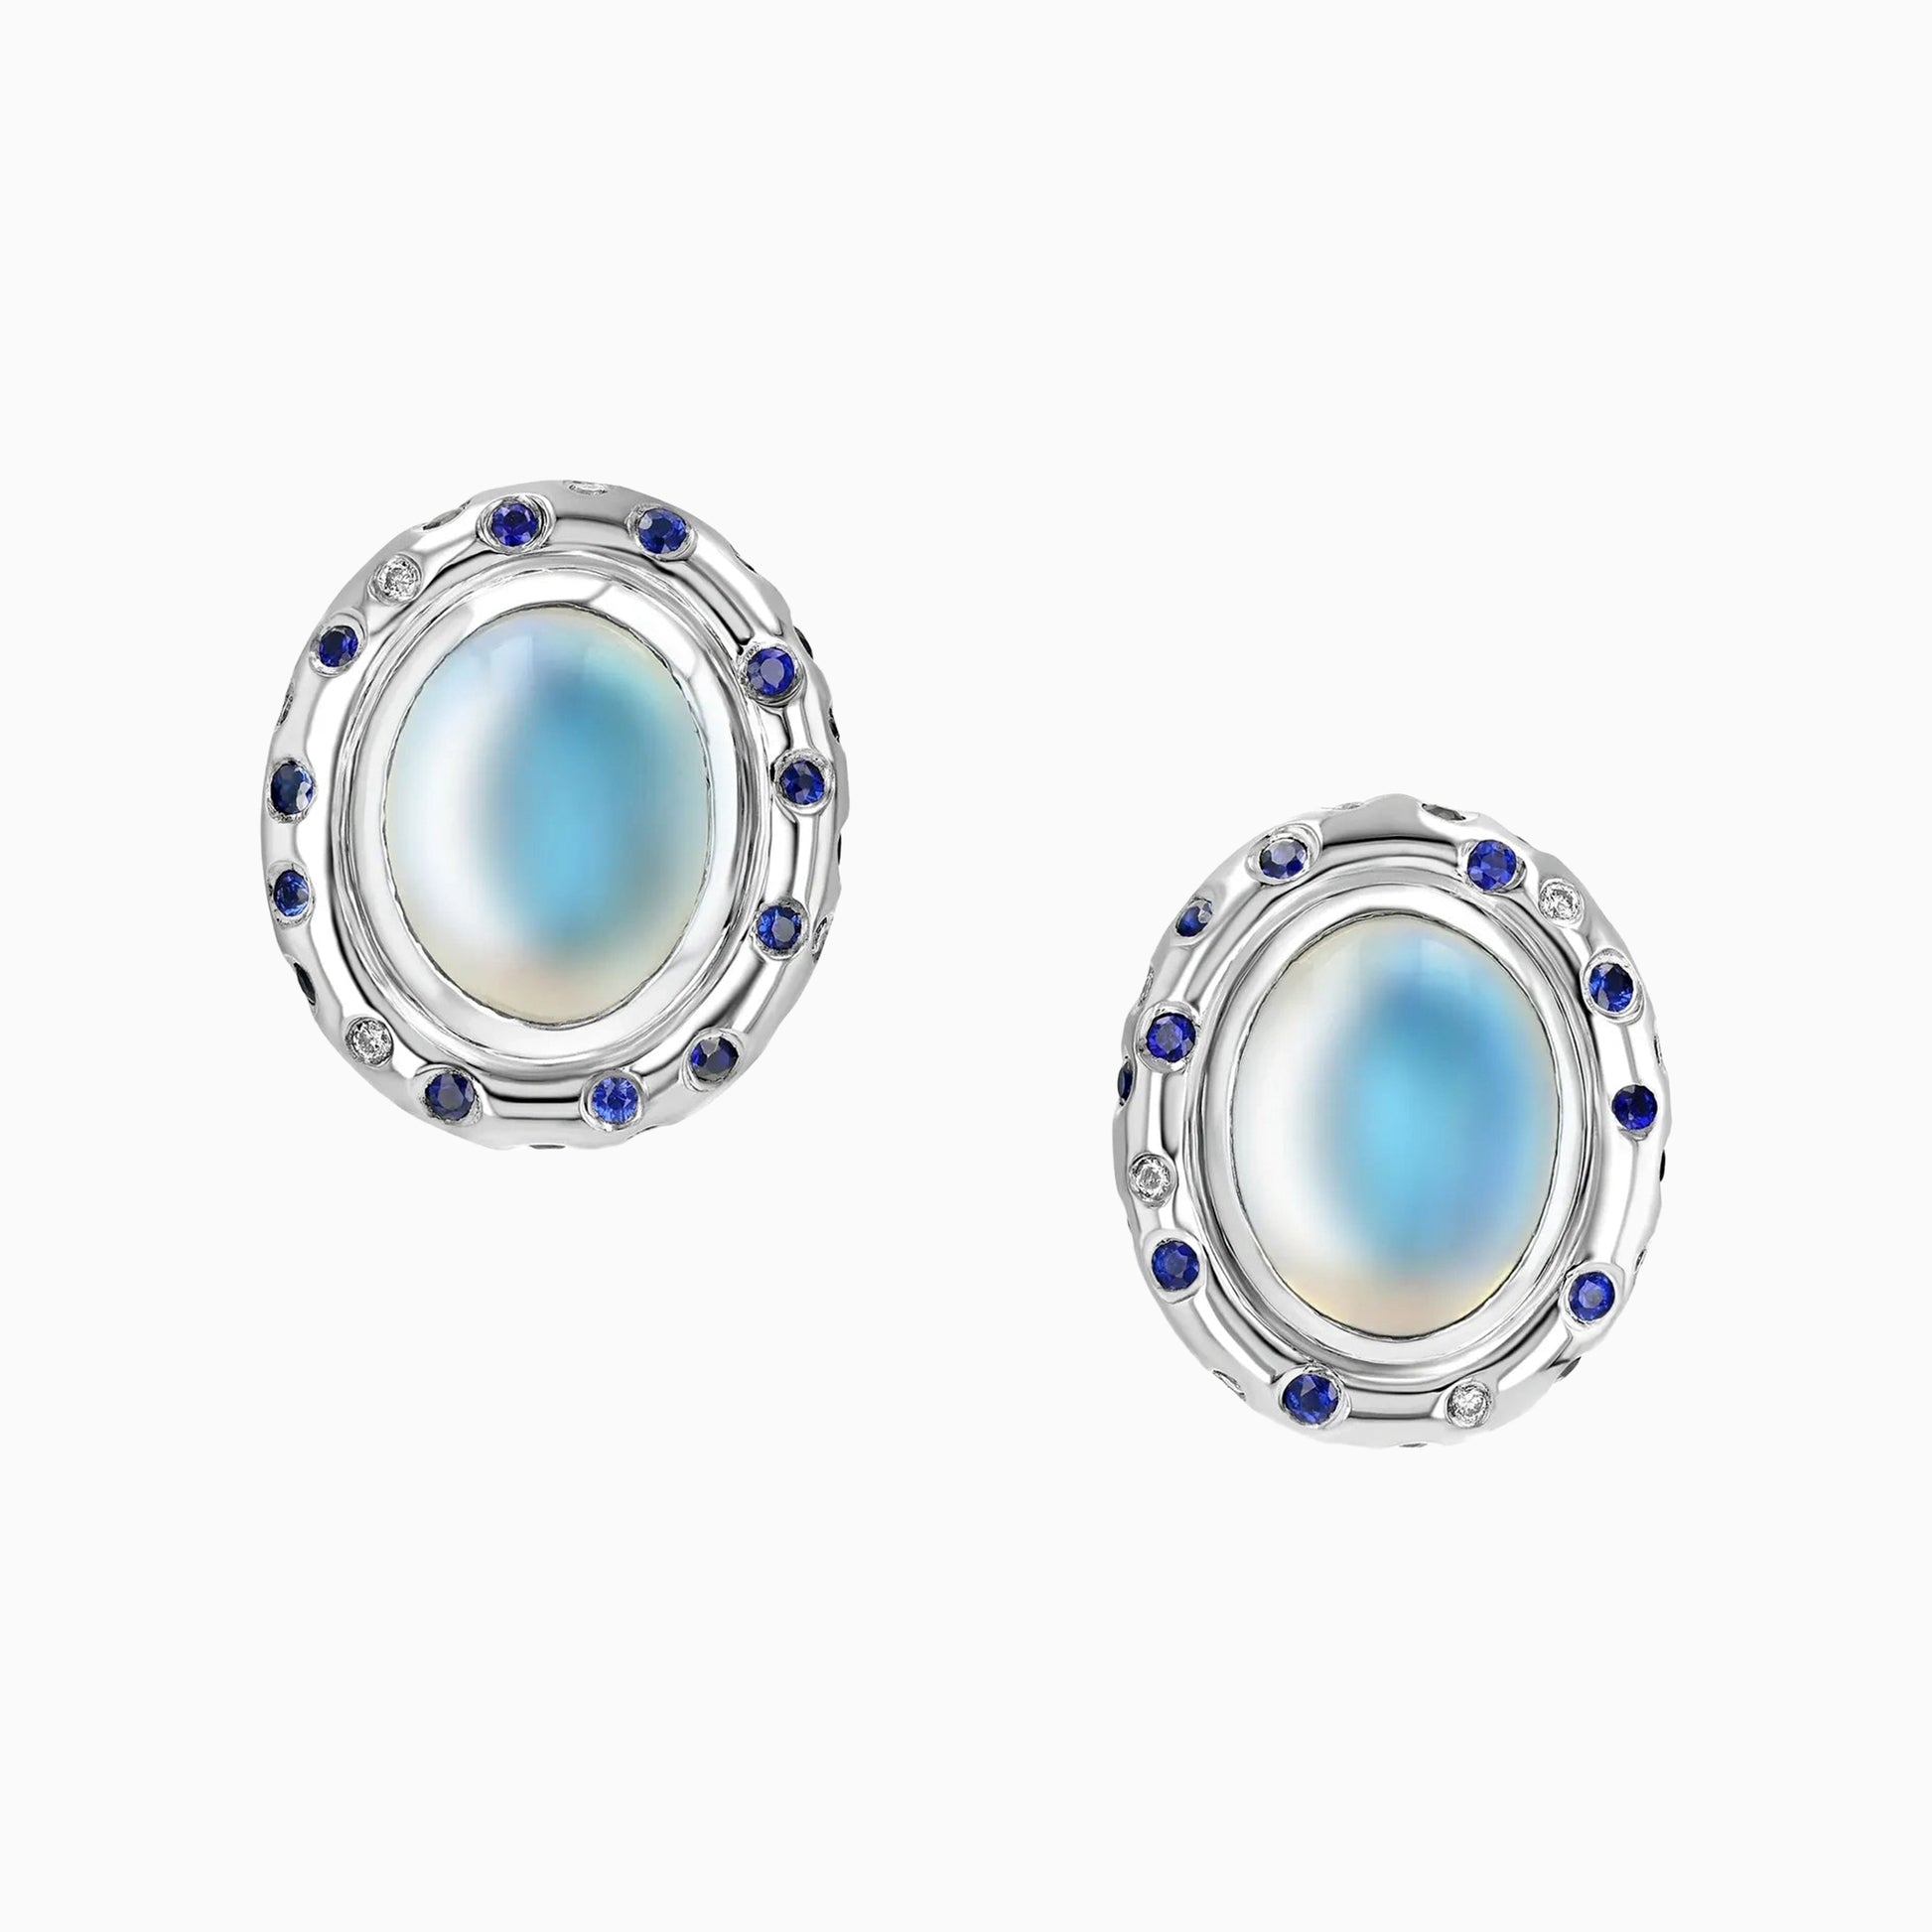 Moonstone Sapphire & Diamonds Gold Earrings on a white background